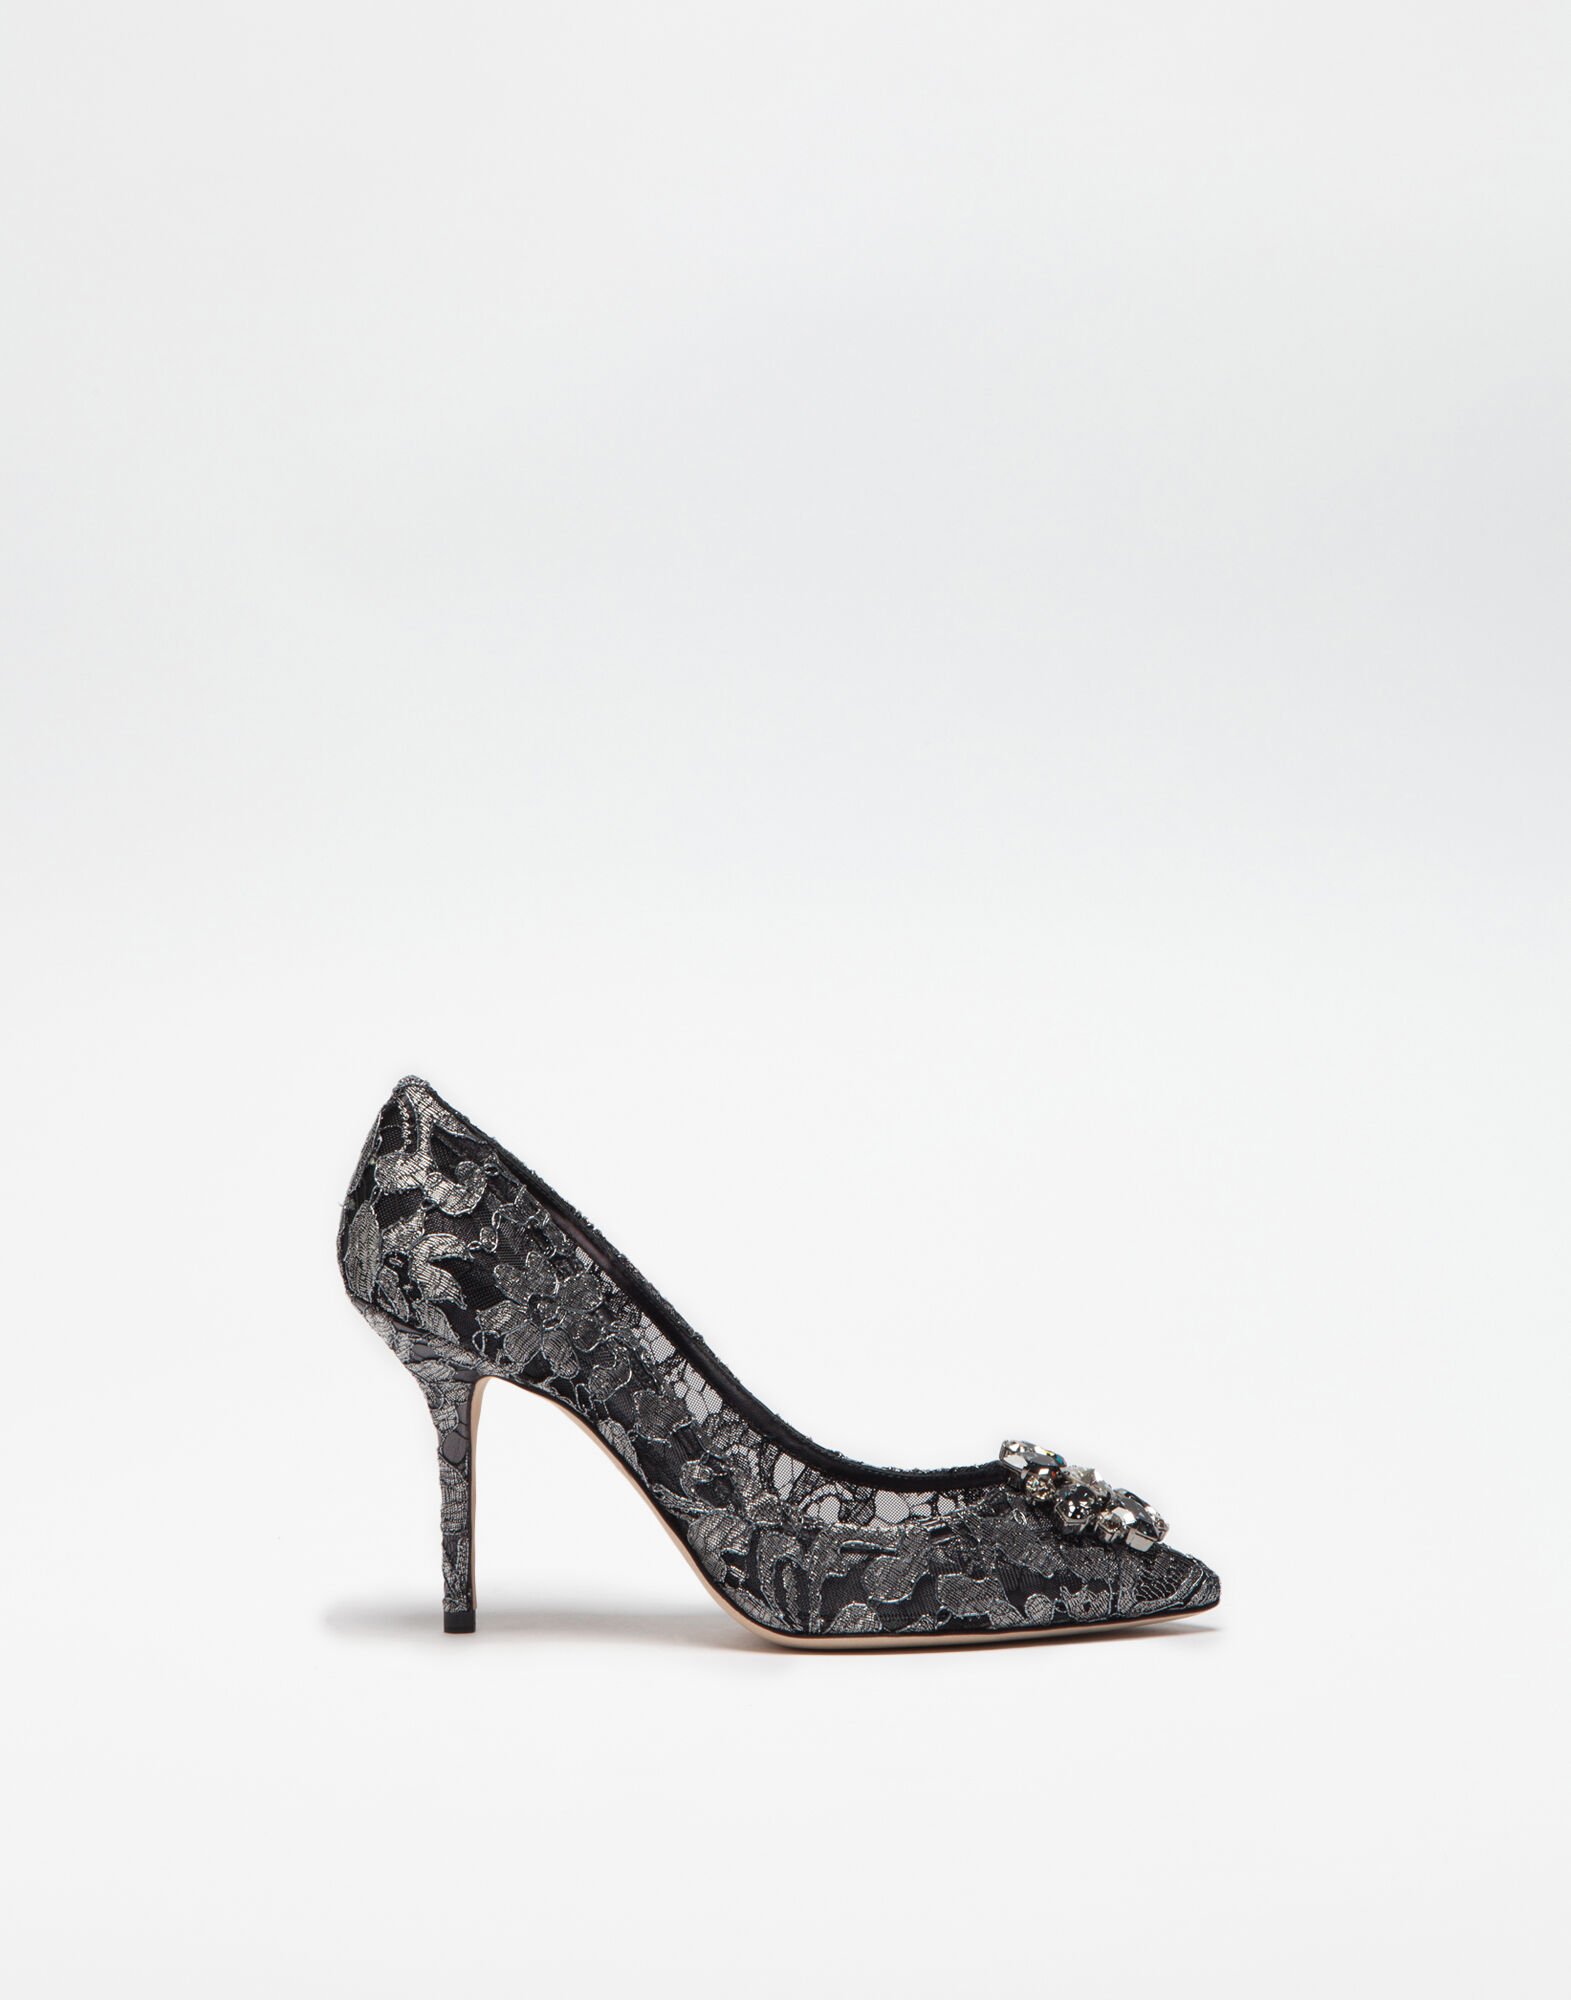 Dolce & Gabbana Lurex lace rainbow pumps with brooch detailing Sand CQ0023AG667